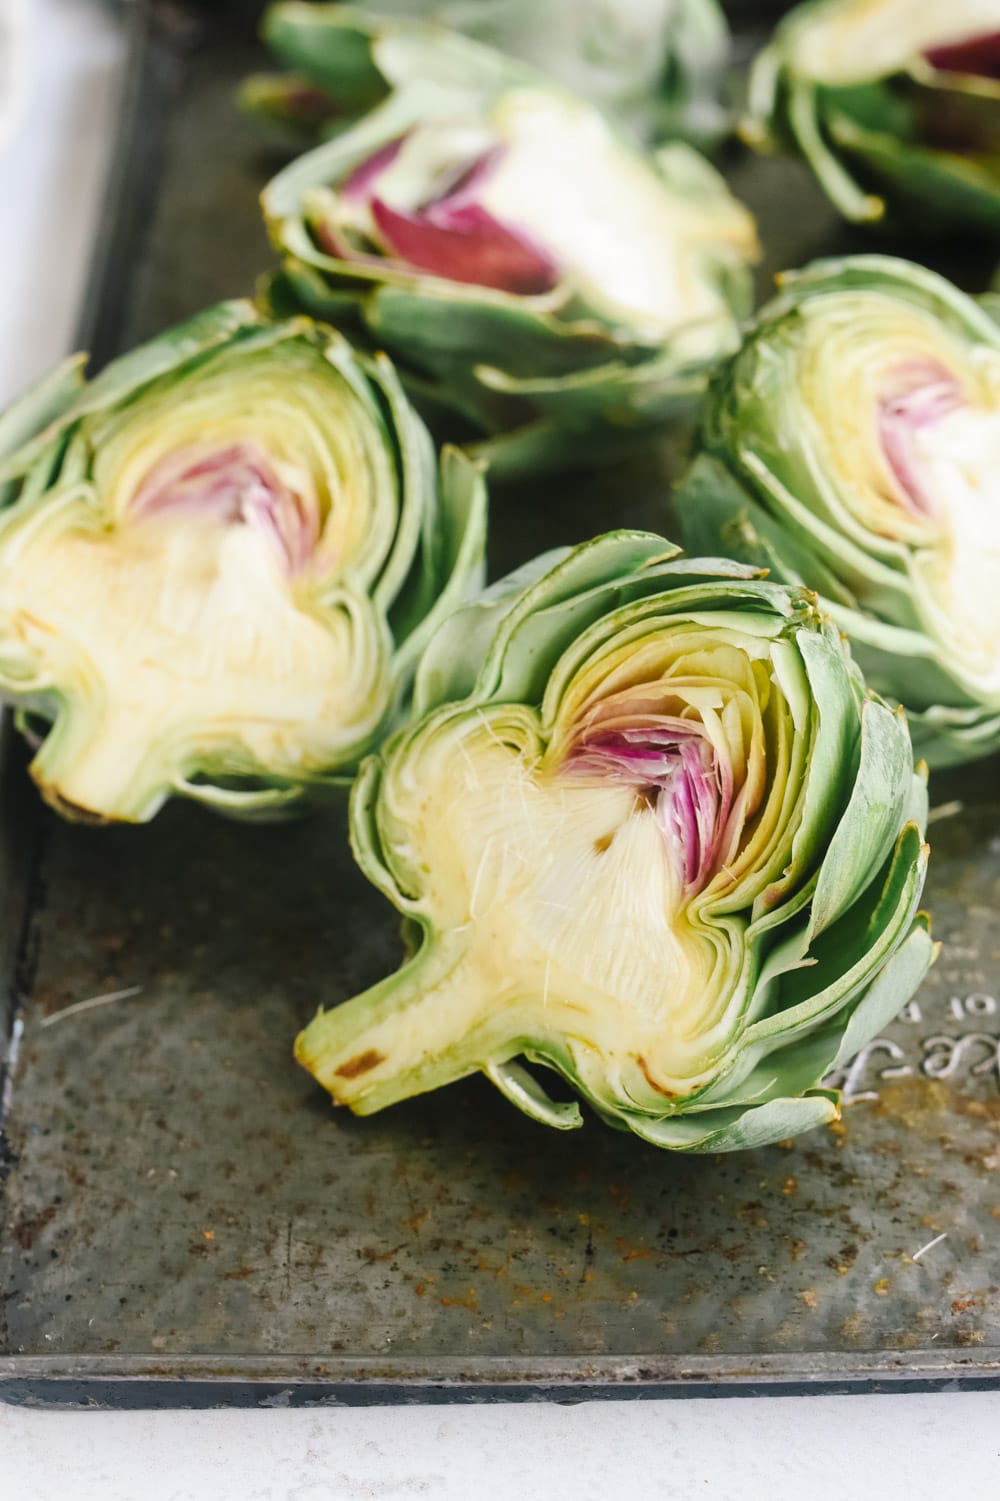 Grilled Artichokes | Recipe from Leigh Anne Wilkes